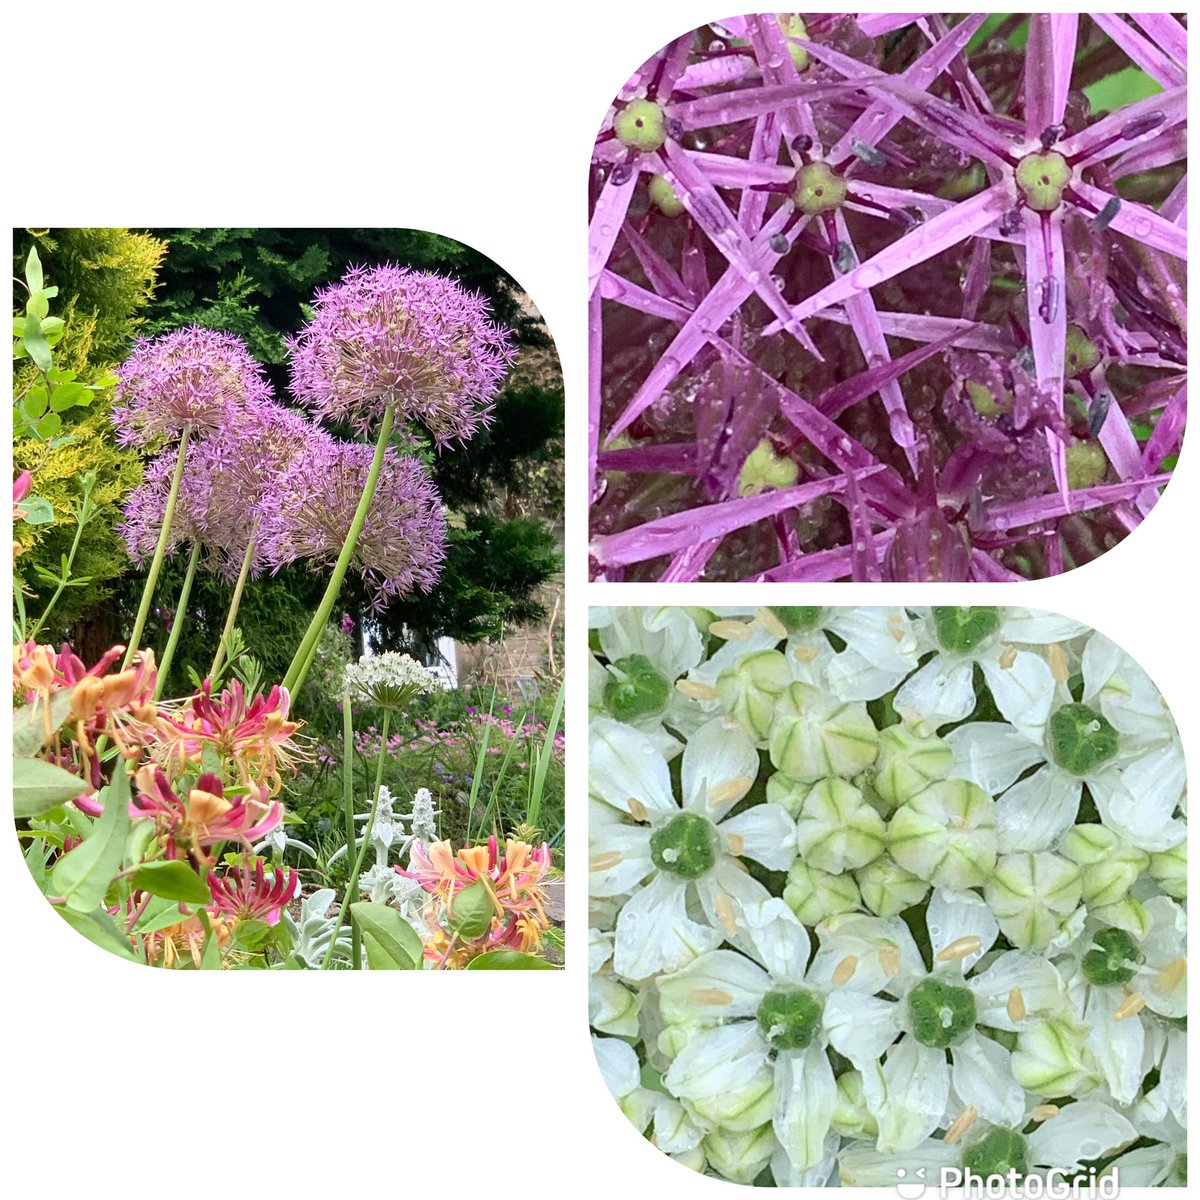 #fowersonfriday Alliums doing their thing come rain or shine.